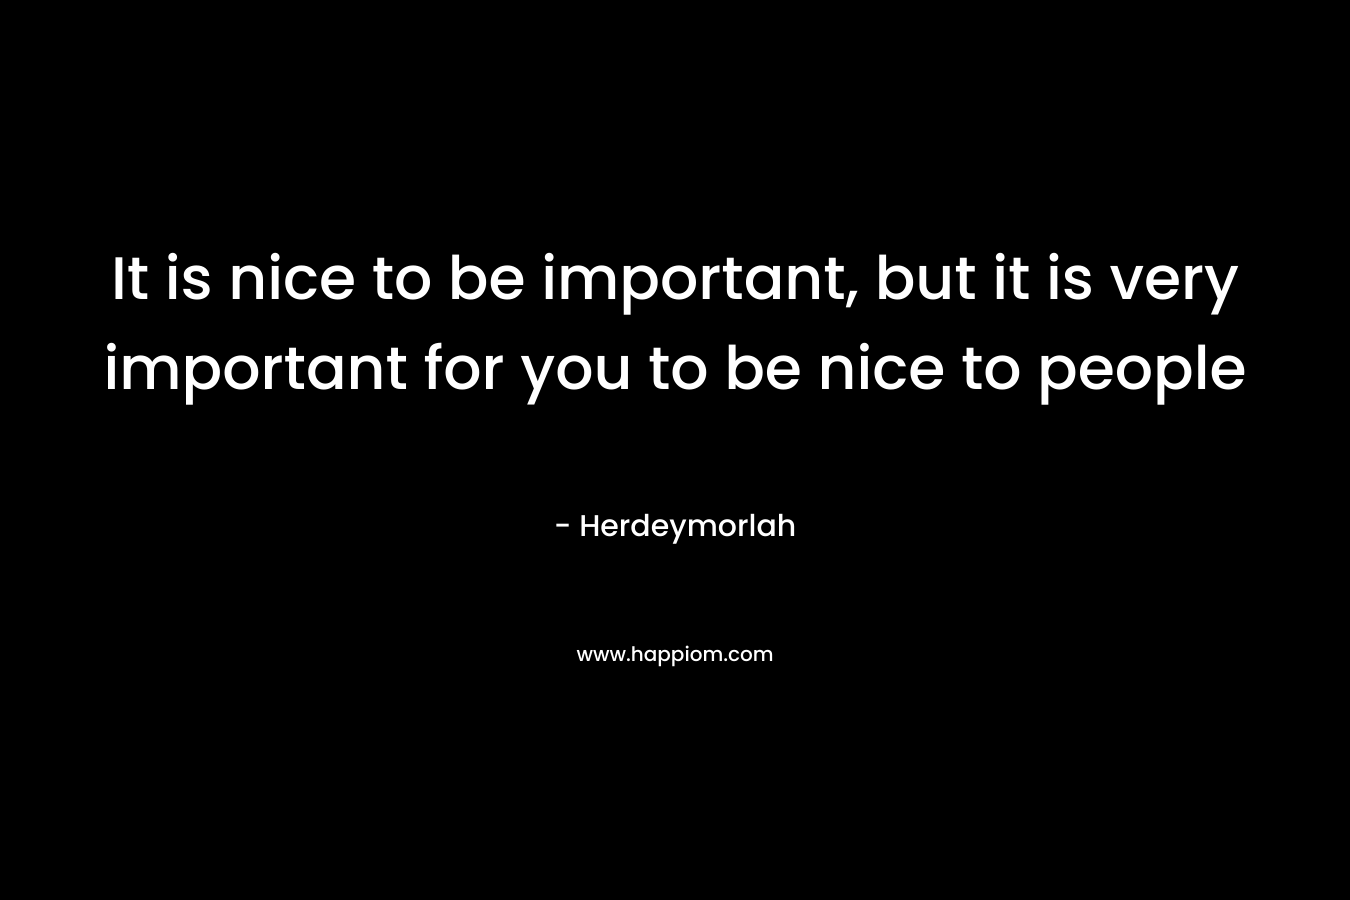 It is nice to be important, but it is very important for you to be nice to people